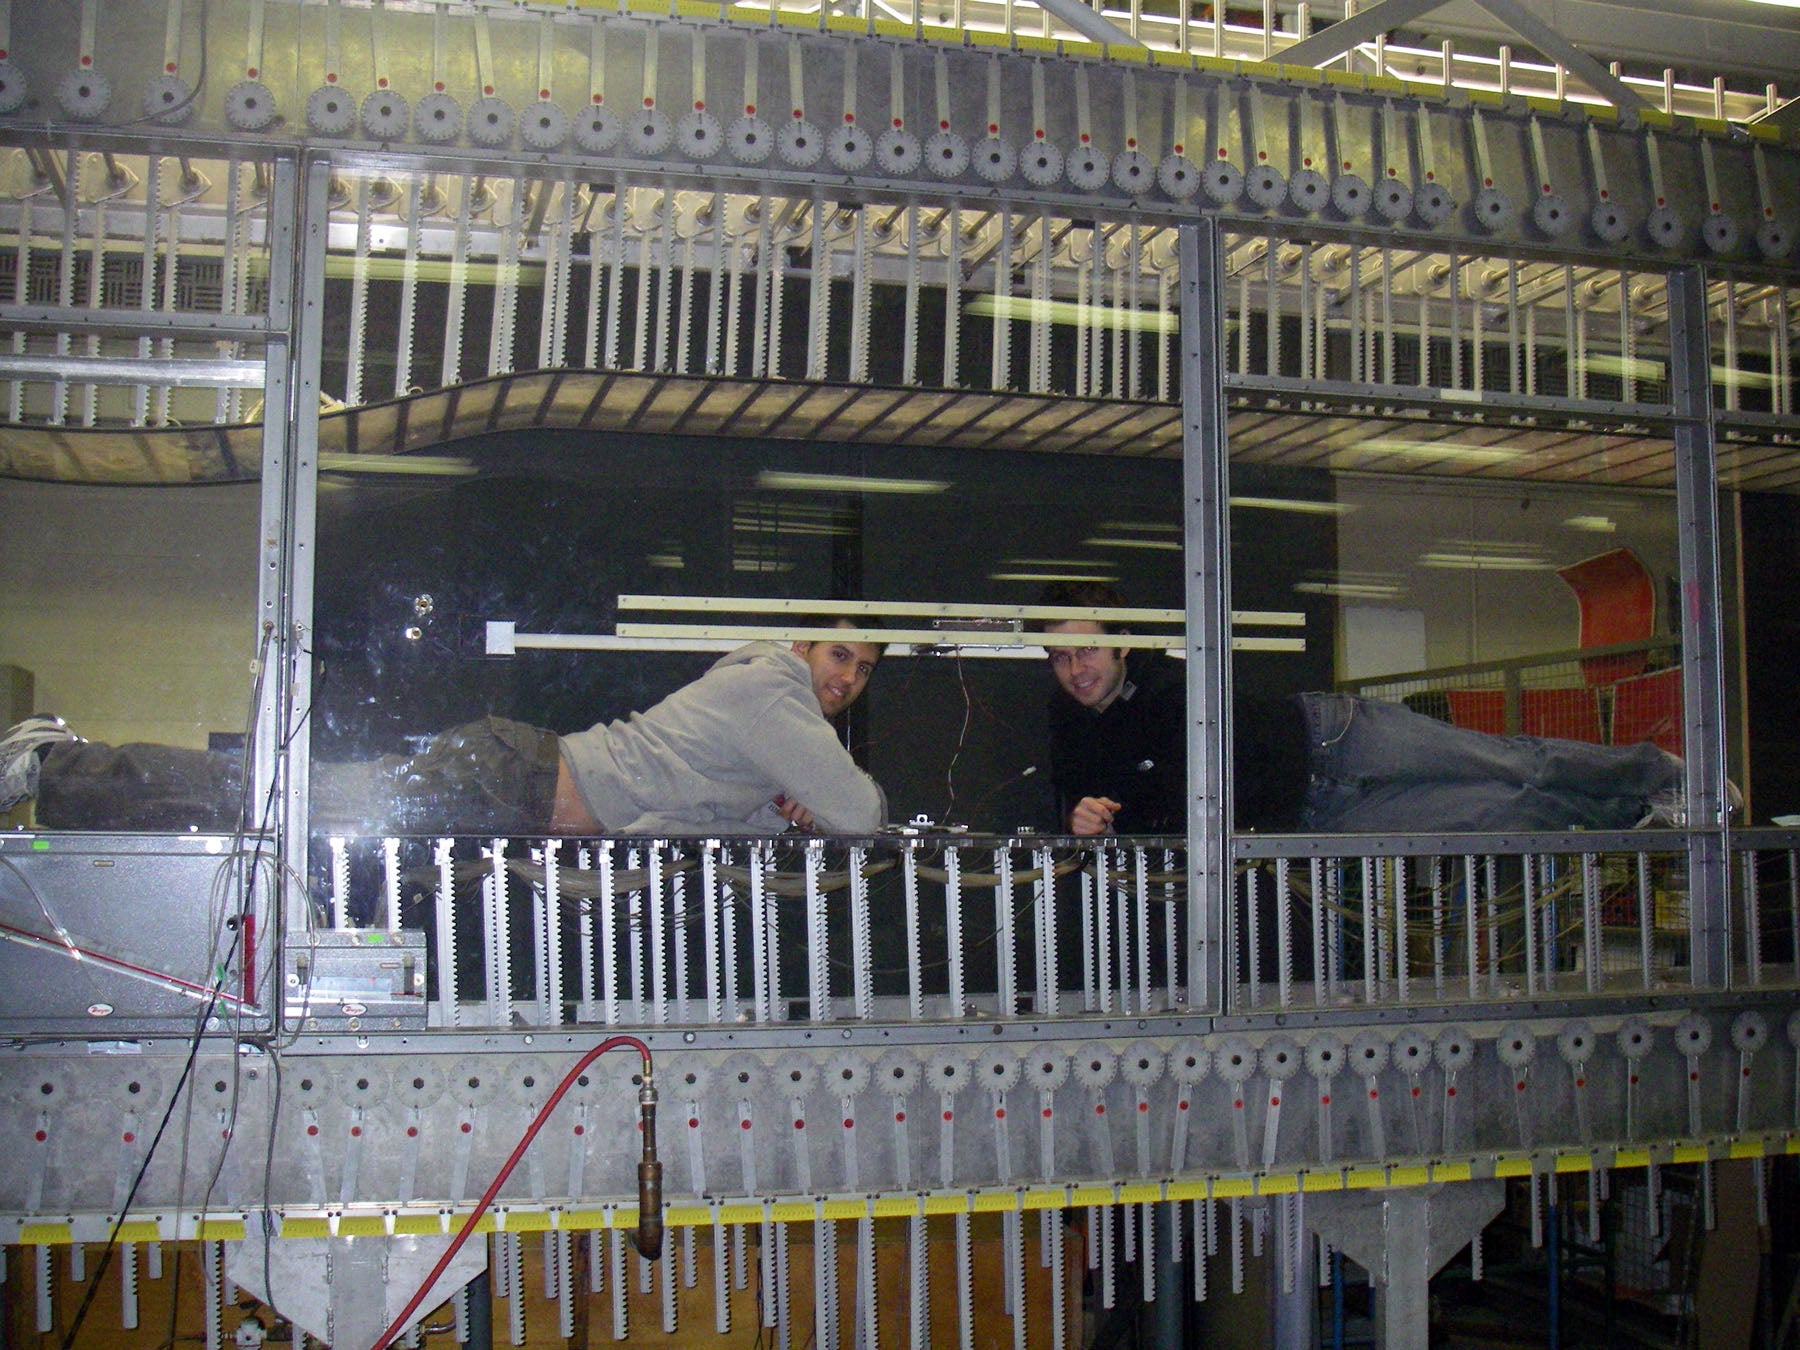 Ryan & Mike "relaxing" in the wind tunnel, 2009